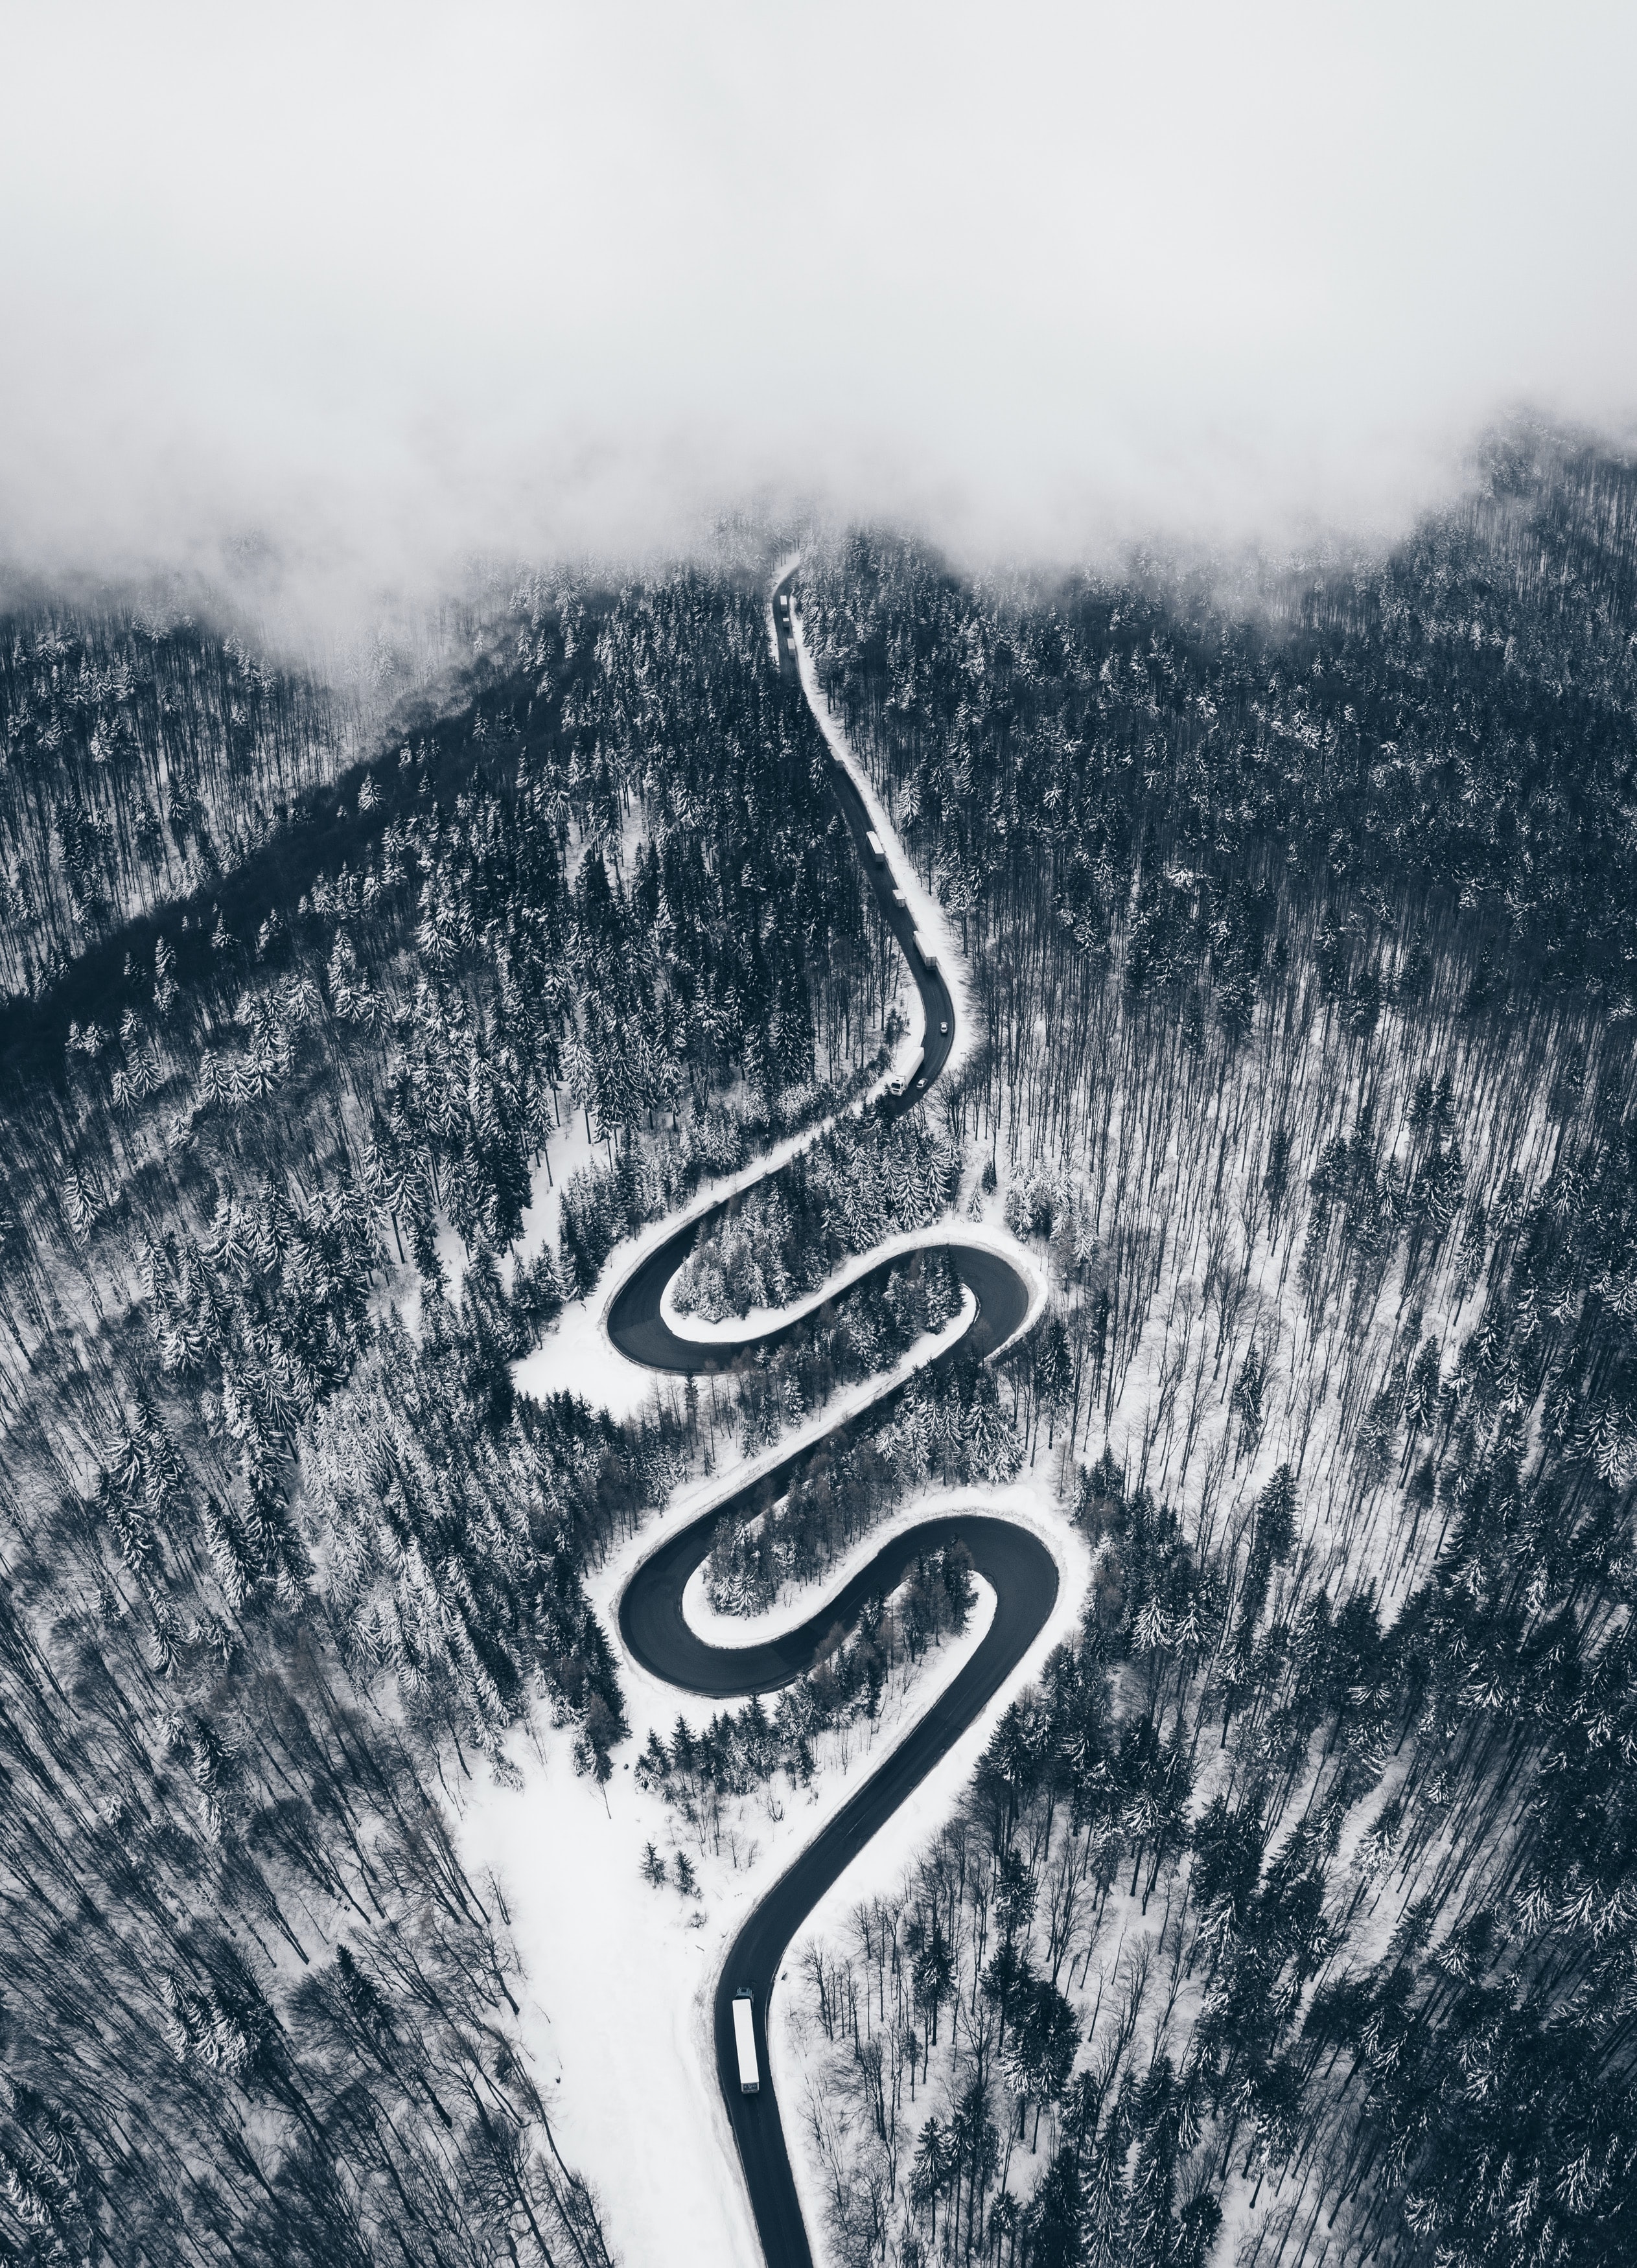 winding, forest, nature, snow, view from above, road, sinuous